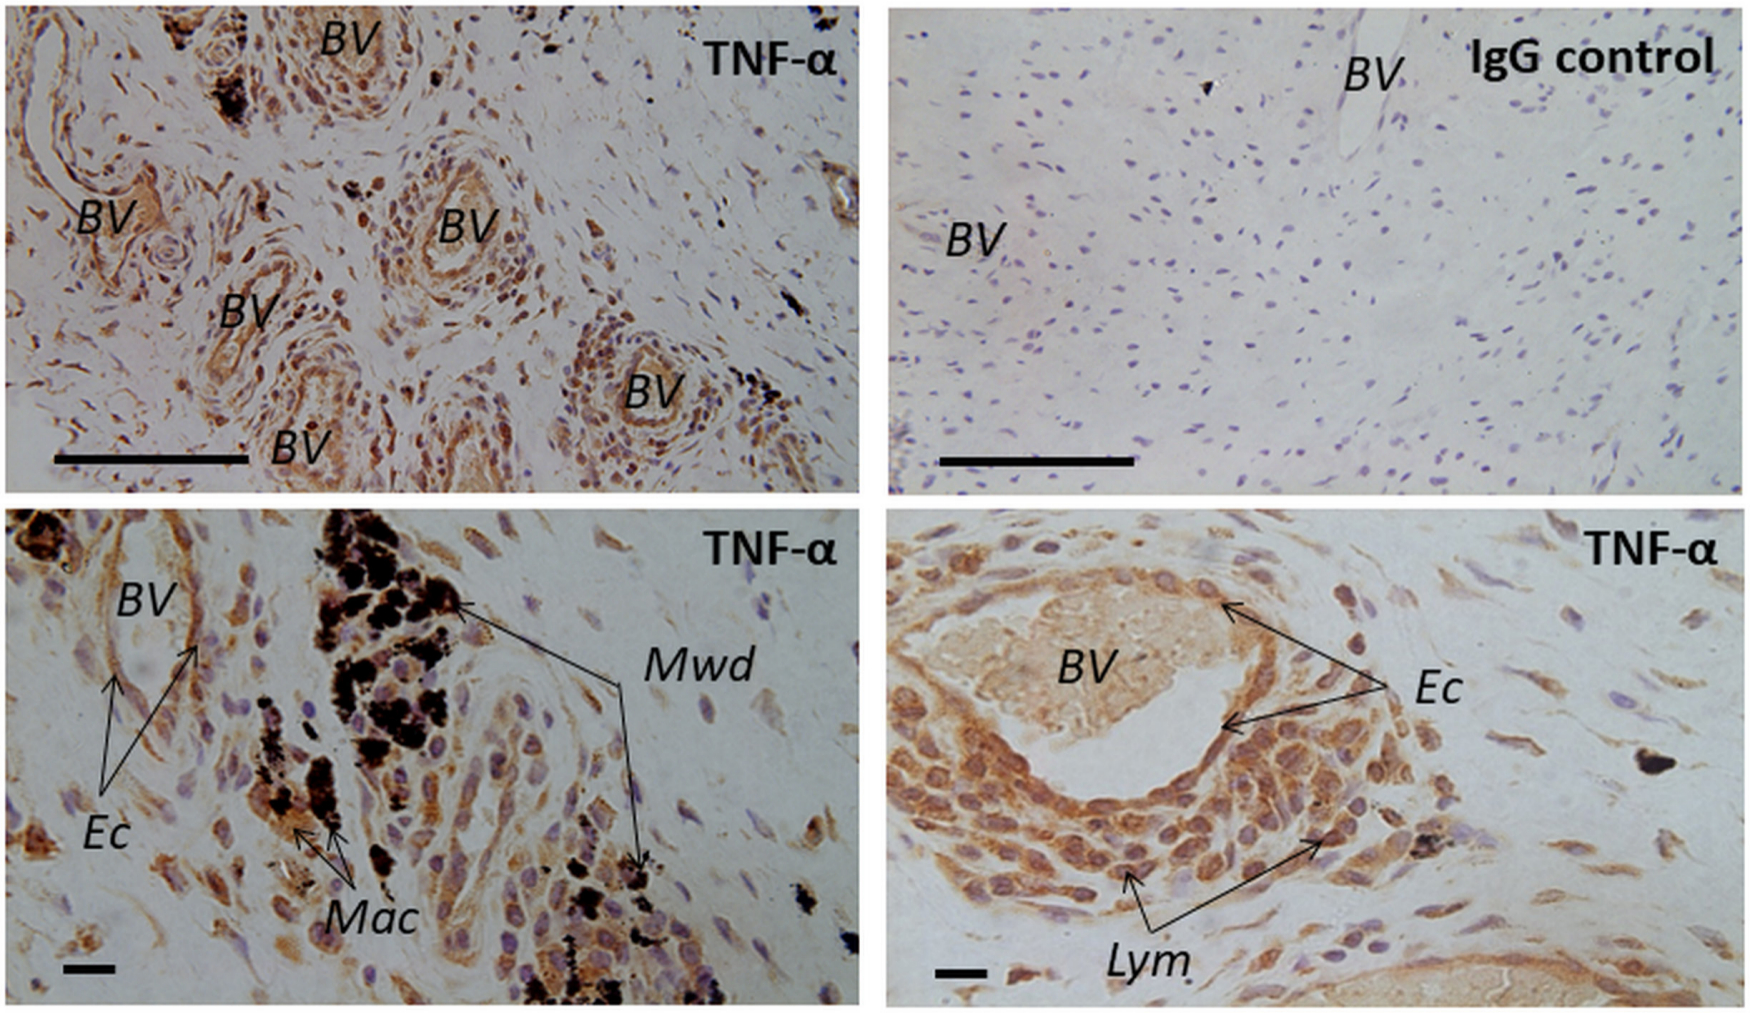 Fig. 1 
            Light microscopic images displaying hip capsular tissue from patients who underwent revision surgery for a failed hip arthroplasty. Tissues were stained for tumour necrosis factor-alpha (TNF-α) using anti-TNFα antibody, as part of the immunohistochemical staining (see Table I for more details of this antibody). Note the strong immunoexpression in the revision samples containing metal wear products. TNF-α-expressing cells were identified as macrophages (Mac), lymphocytes (Lym), and endothelial cells (Ec) lining the blood vessels (BV). No specific staining was detected in the isotypic controls. IgG, immunoglobulin G; Mwd, metal wear debris. Scale bars: upper panel = 100 μm, lower panel = 10 μm.
          